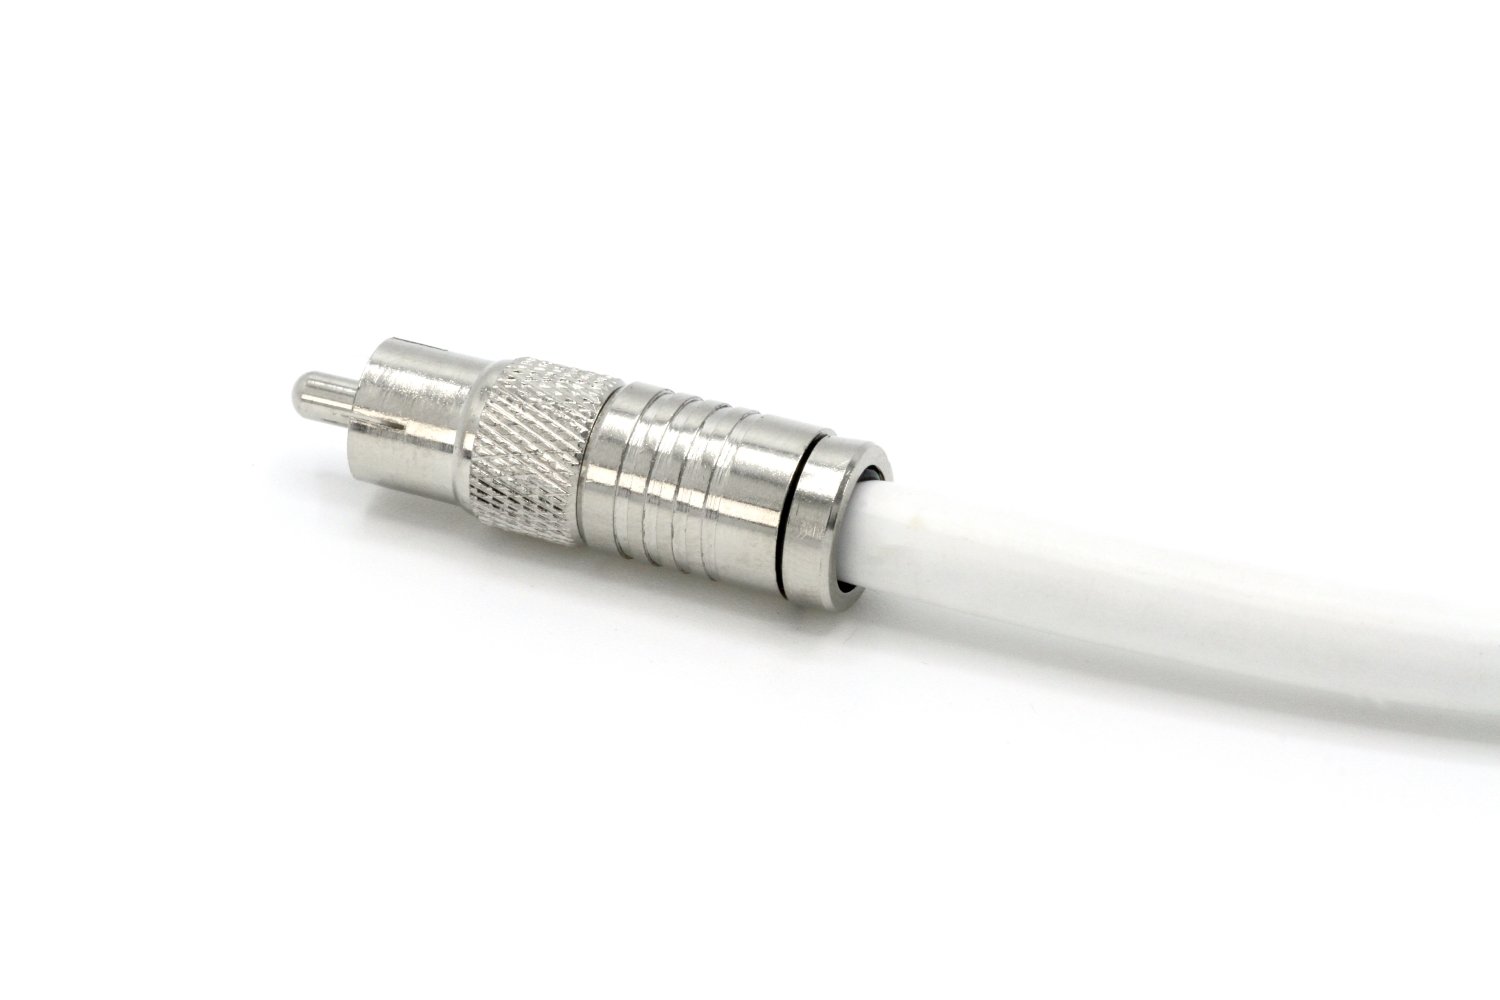 digital audio cable : digital coaxial cable with rca connections, 75 ohm  coax, proudly made in the usa : subwoofer cable  (s/pdif) white rca cable, 6 feet - image 3 of 6